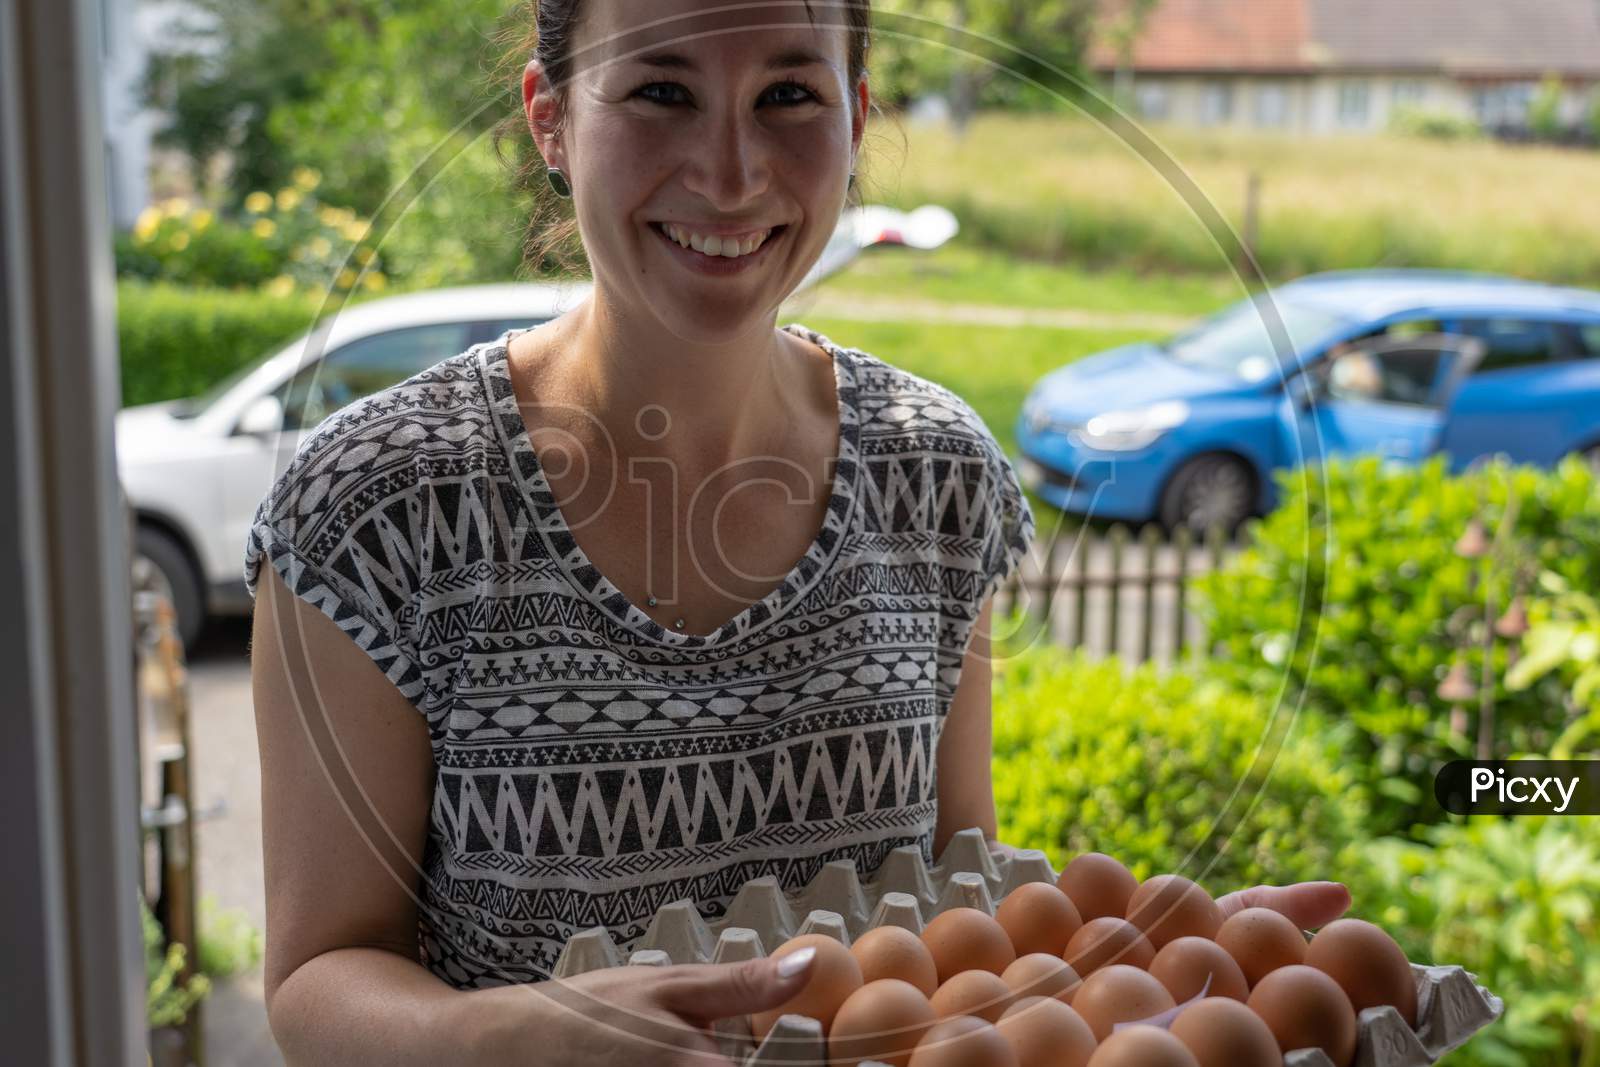 Delivery Of Fresh Eggs At The House Door By A Young Smiling Woman.